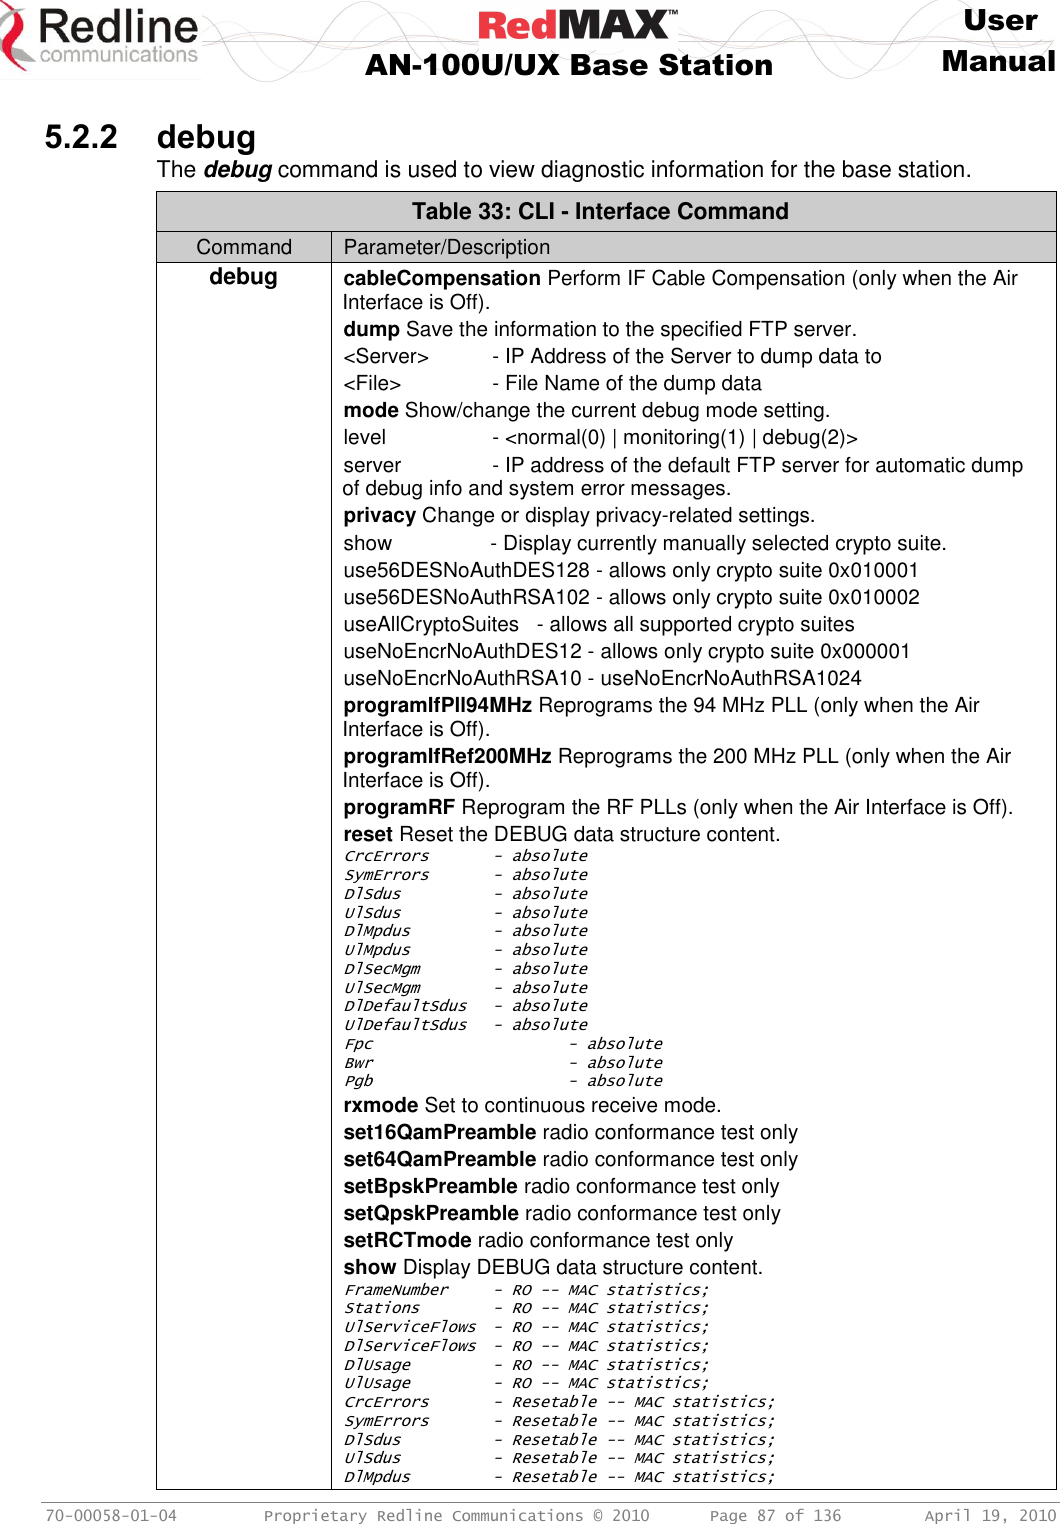     User  AN-100U/UX Base Station Manual   70-00058-01-04  Proprietary Redline Communications © 2010   Page 87 of 136  April 19, 2010  5.2.2 debug The debug command is used to view diagnostic information for the base station. Table 33: CLI - Interface Command Command Parameter/Description debug cableCompensation Perform IF Cable Compensation (only when the Air Interface is Off). dump Save the information to the specified FTP server. &lt;Server&gt;         - IP Address of the Server to dump data to &lt;File&gt;           - File Name of the dump data mode Show/change the current debug mode setting. level            - &lt;normal(0) | monitoring(1) | debug(2)&gt; server           - IP address of the default FTP server for automatic dump of debug info and system error messages. privacy Change or display privacy-related settings. show                 - Display currently manually selected crypto suite. use56DESNoAuthDES128 - allows only crypto suite 0x010001 use56DESNoAuthRSA102 - allows only crypto suite 0x010002 useAllCryptoSuites   - allows all supported crypto suites useNoEncrNoAuthDES12 - allows only crypto suite 0x000001 useNoEncrNoAuthRSA10 - useNoEncrNoAuthRSA1024 programIfPll94MHz Reprograms the 94 MHz PLL (only when the Air Interface is Off). programIfRef200MHz Reprograms the 200 MHz PLL (only when the Air Interface is Off). programRF Reprogram the RF PLLs (only when the Air Interface is Off). reset Reset the DEBUG data structure content. CrcErrors       - absolute SymErrors       - absolute DlSdus          - absolute UlSdus          - absolute DlMpdus         - absolute UlMpdus         - absolute DlSecMgm        - absolute UlSecMgm        - absolute DlDefaultSdus   - absolute UlDefaultSdus   - absolute Fpc               - absolute Bwr               - absolute Pgb               - absolute rxmode Set to continuous receive mode. set16QamPreamble radio conformance test only set64QamPreamble radio conformance test only setBpskPreamble radio conformance test only setQpskPreamble radio conformance test only setRCTmode radio conformance test only show Display DEBUG data structure content. FrameNumber     - RO -- MAC statistics; Stations        - RO -- MAC statistics; UlServiceFlows  - RO -- MAC statistics; DlServiceFlows  - RO -- MAC statistics; DlUsage         - RO -- MAC statistics; UlUsage         - RO -- MAC statistics; CrcErrors       - Resetable -- MAC statistics; SymErrors       - Resetable -- MAC statistics; DlSdus          - Resetable -- MAC statistics; UlSdus          - Resetable -- MAC statistics; DlMpdus         - Resetable -- MAC statistics; 